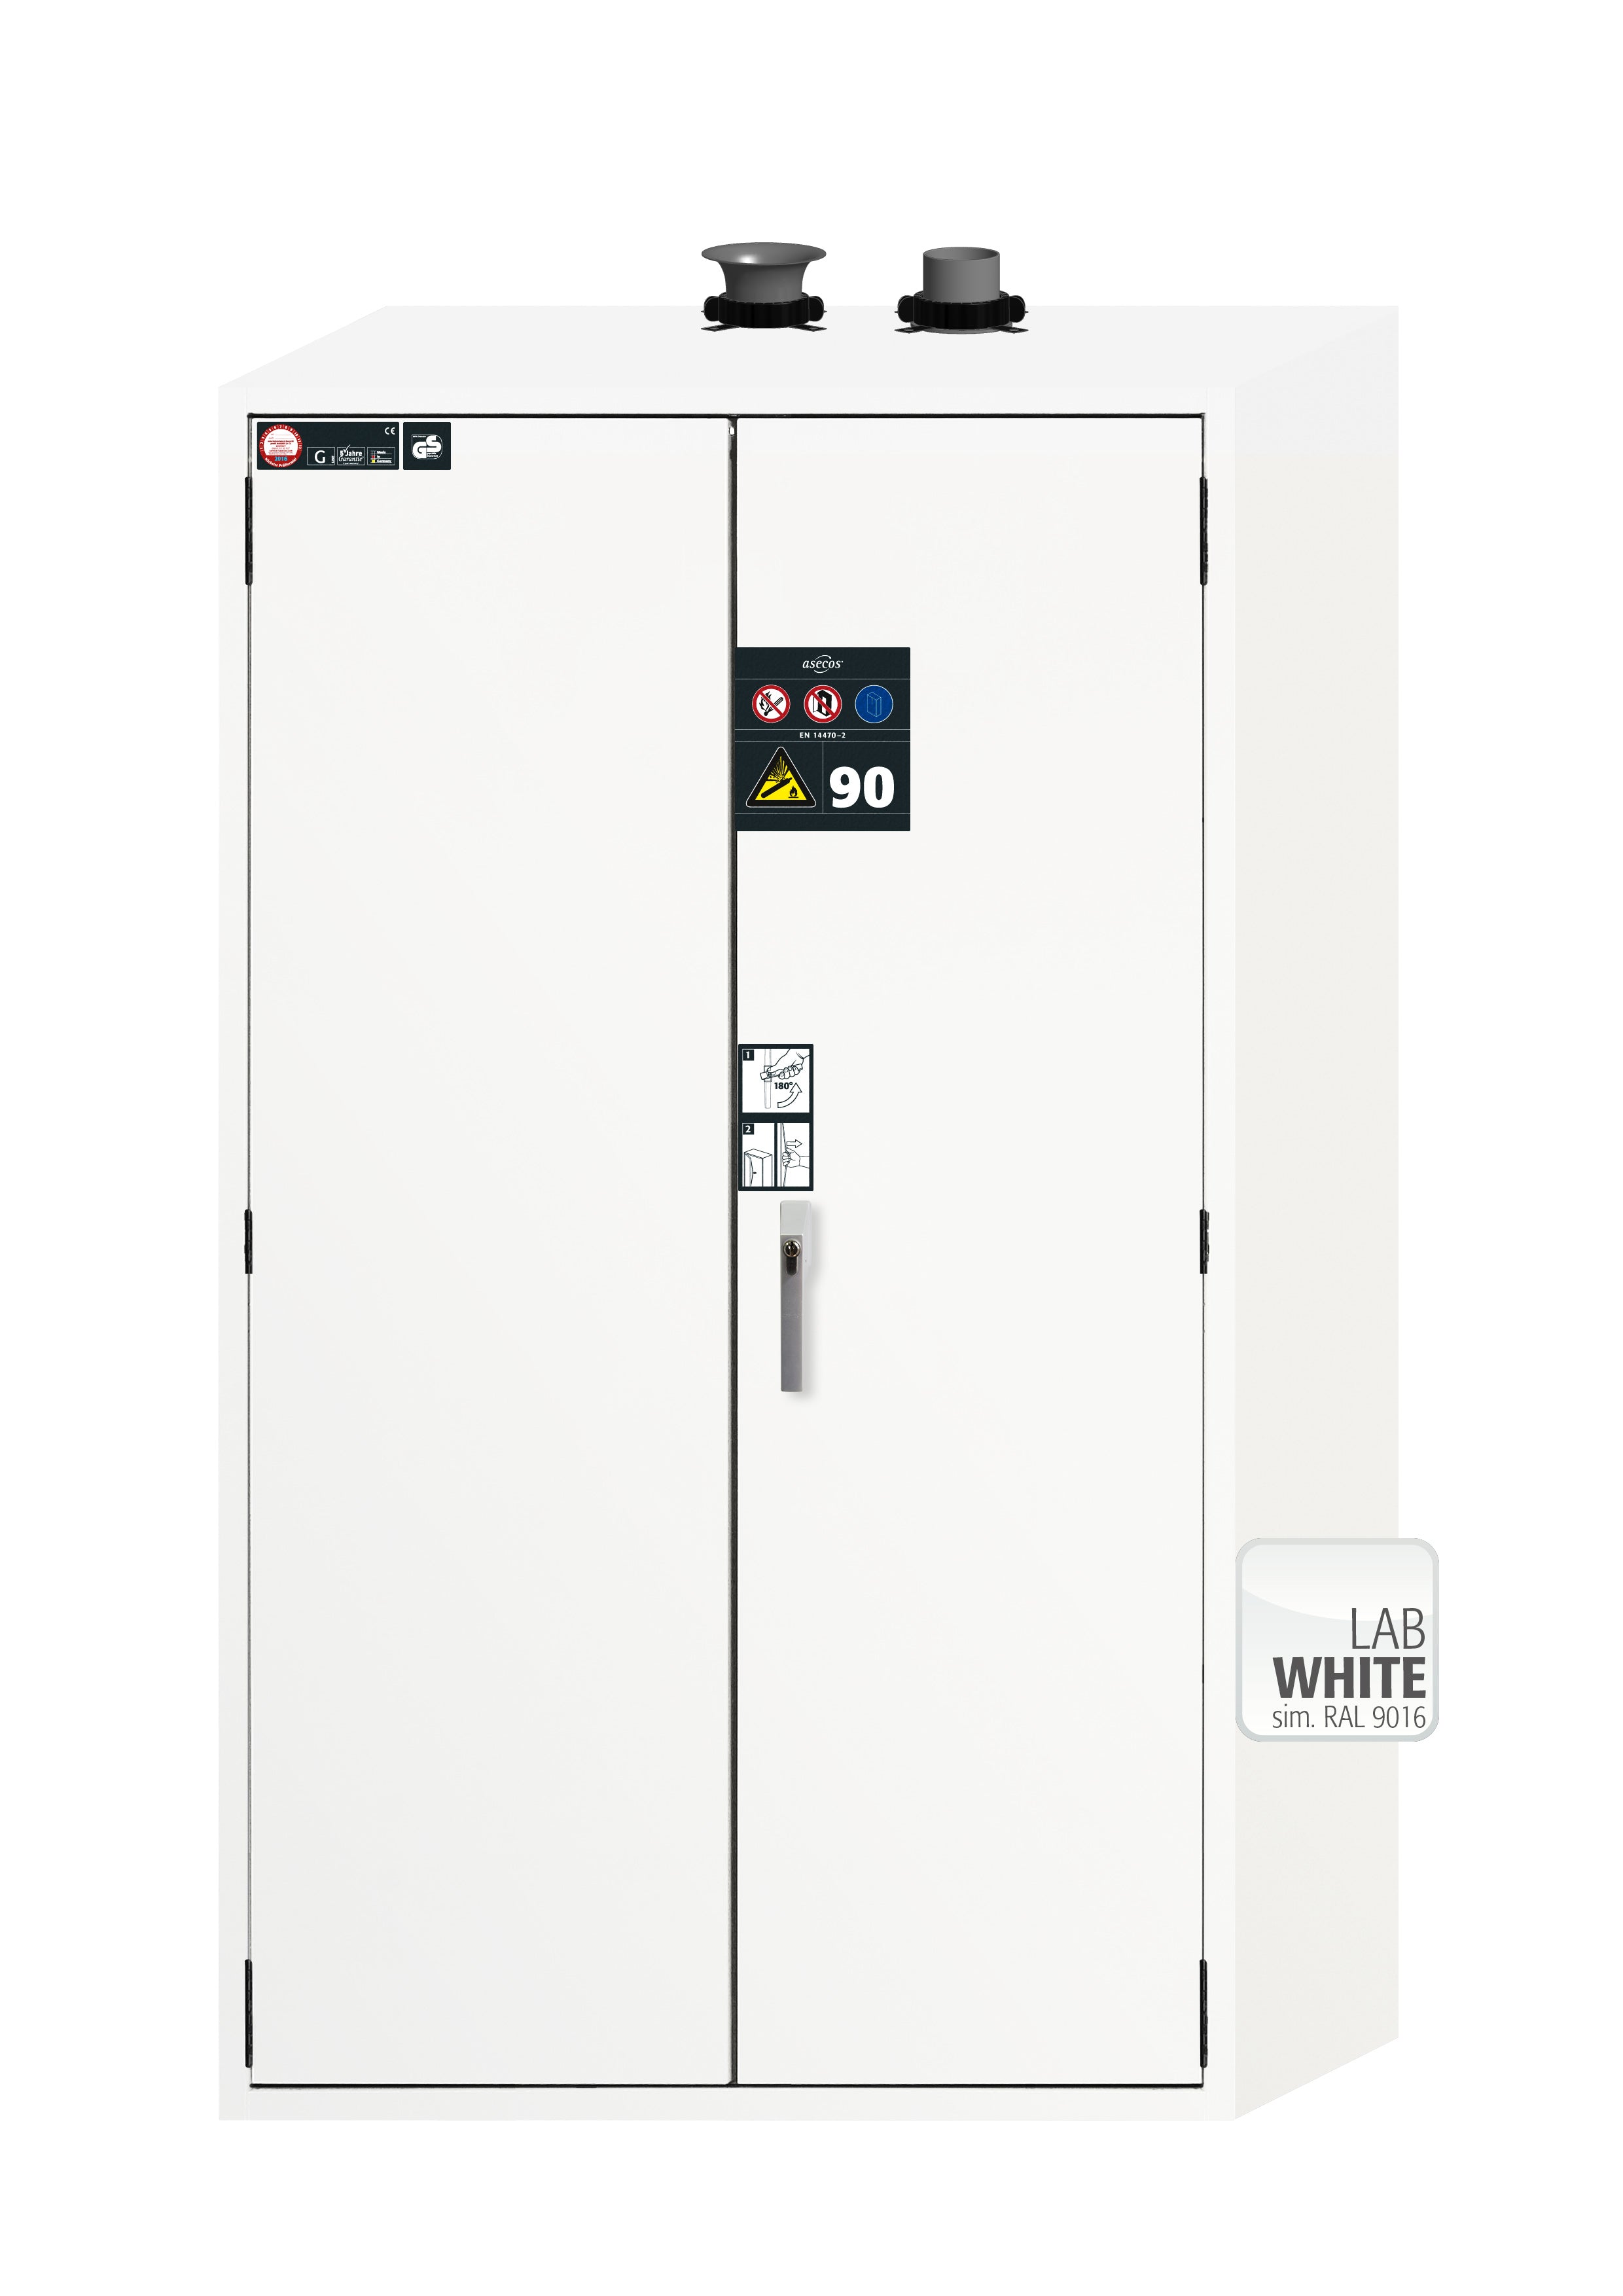 Type 90 compressed gas bottle cabinet G-ULTIMATE-90 model G90.205.120 in laboratory white (similar to RAL 9016) with for 4x compressed gas bottles of 50 liters each